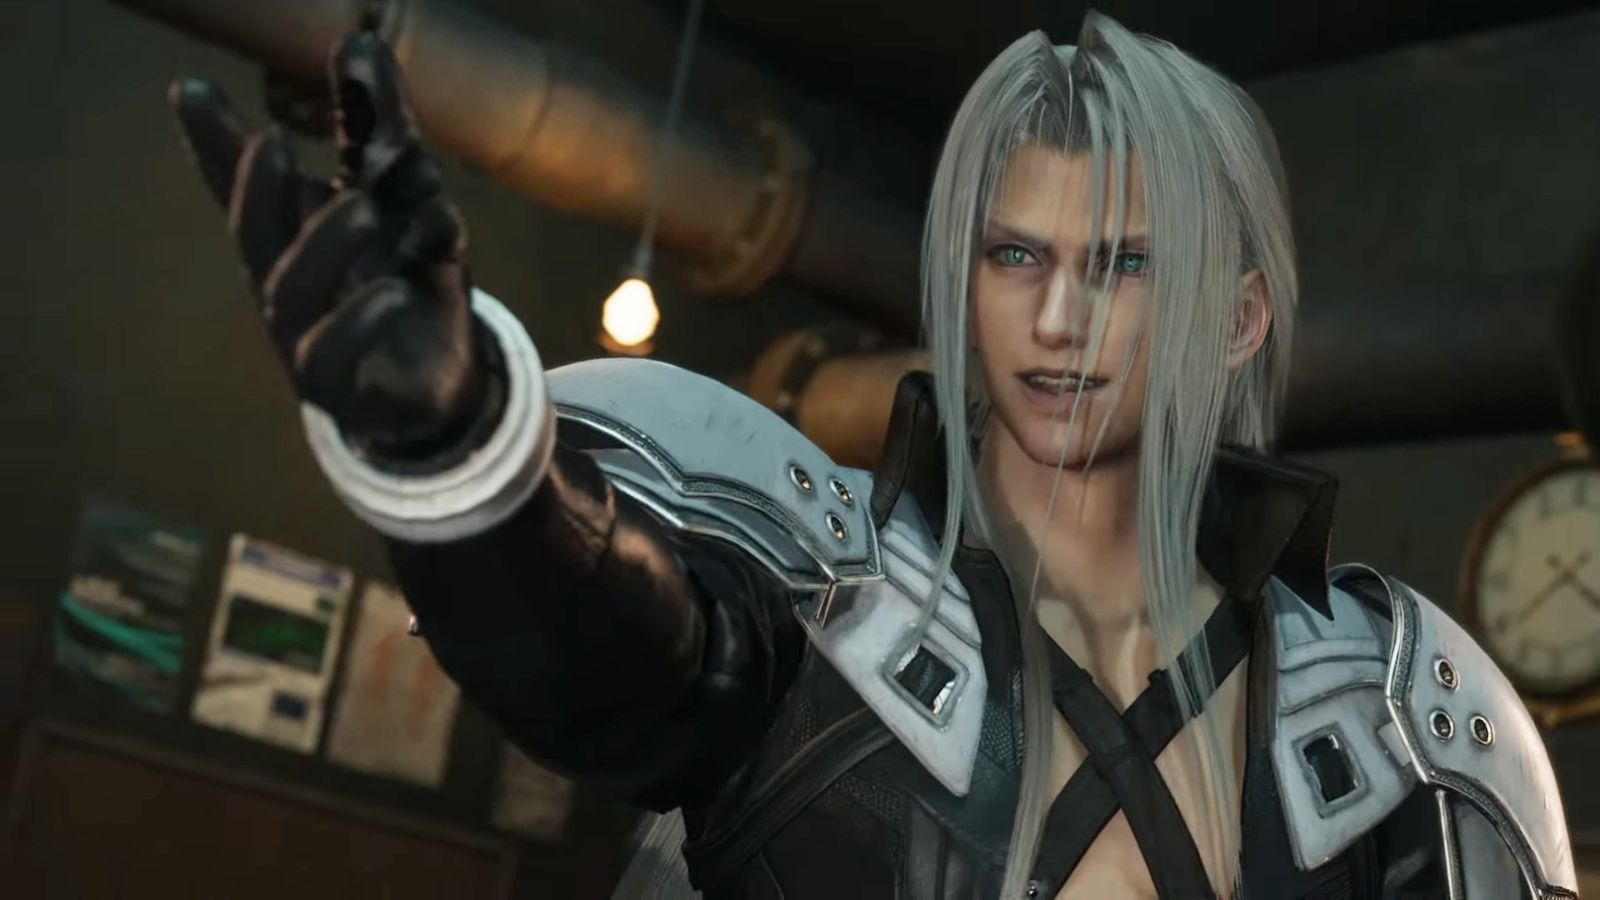 Sephiroth from Final Fantasy VII Rebirth is pointing at the camera